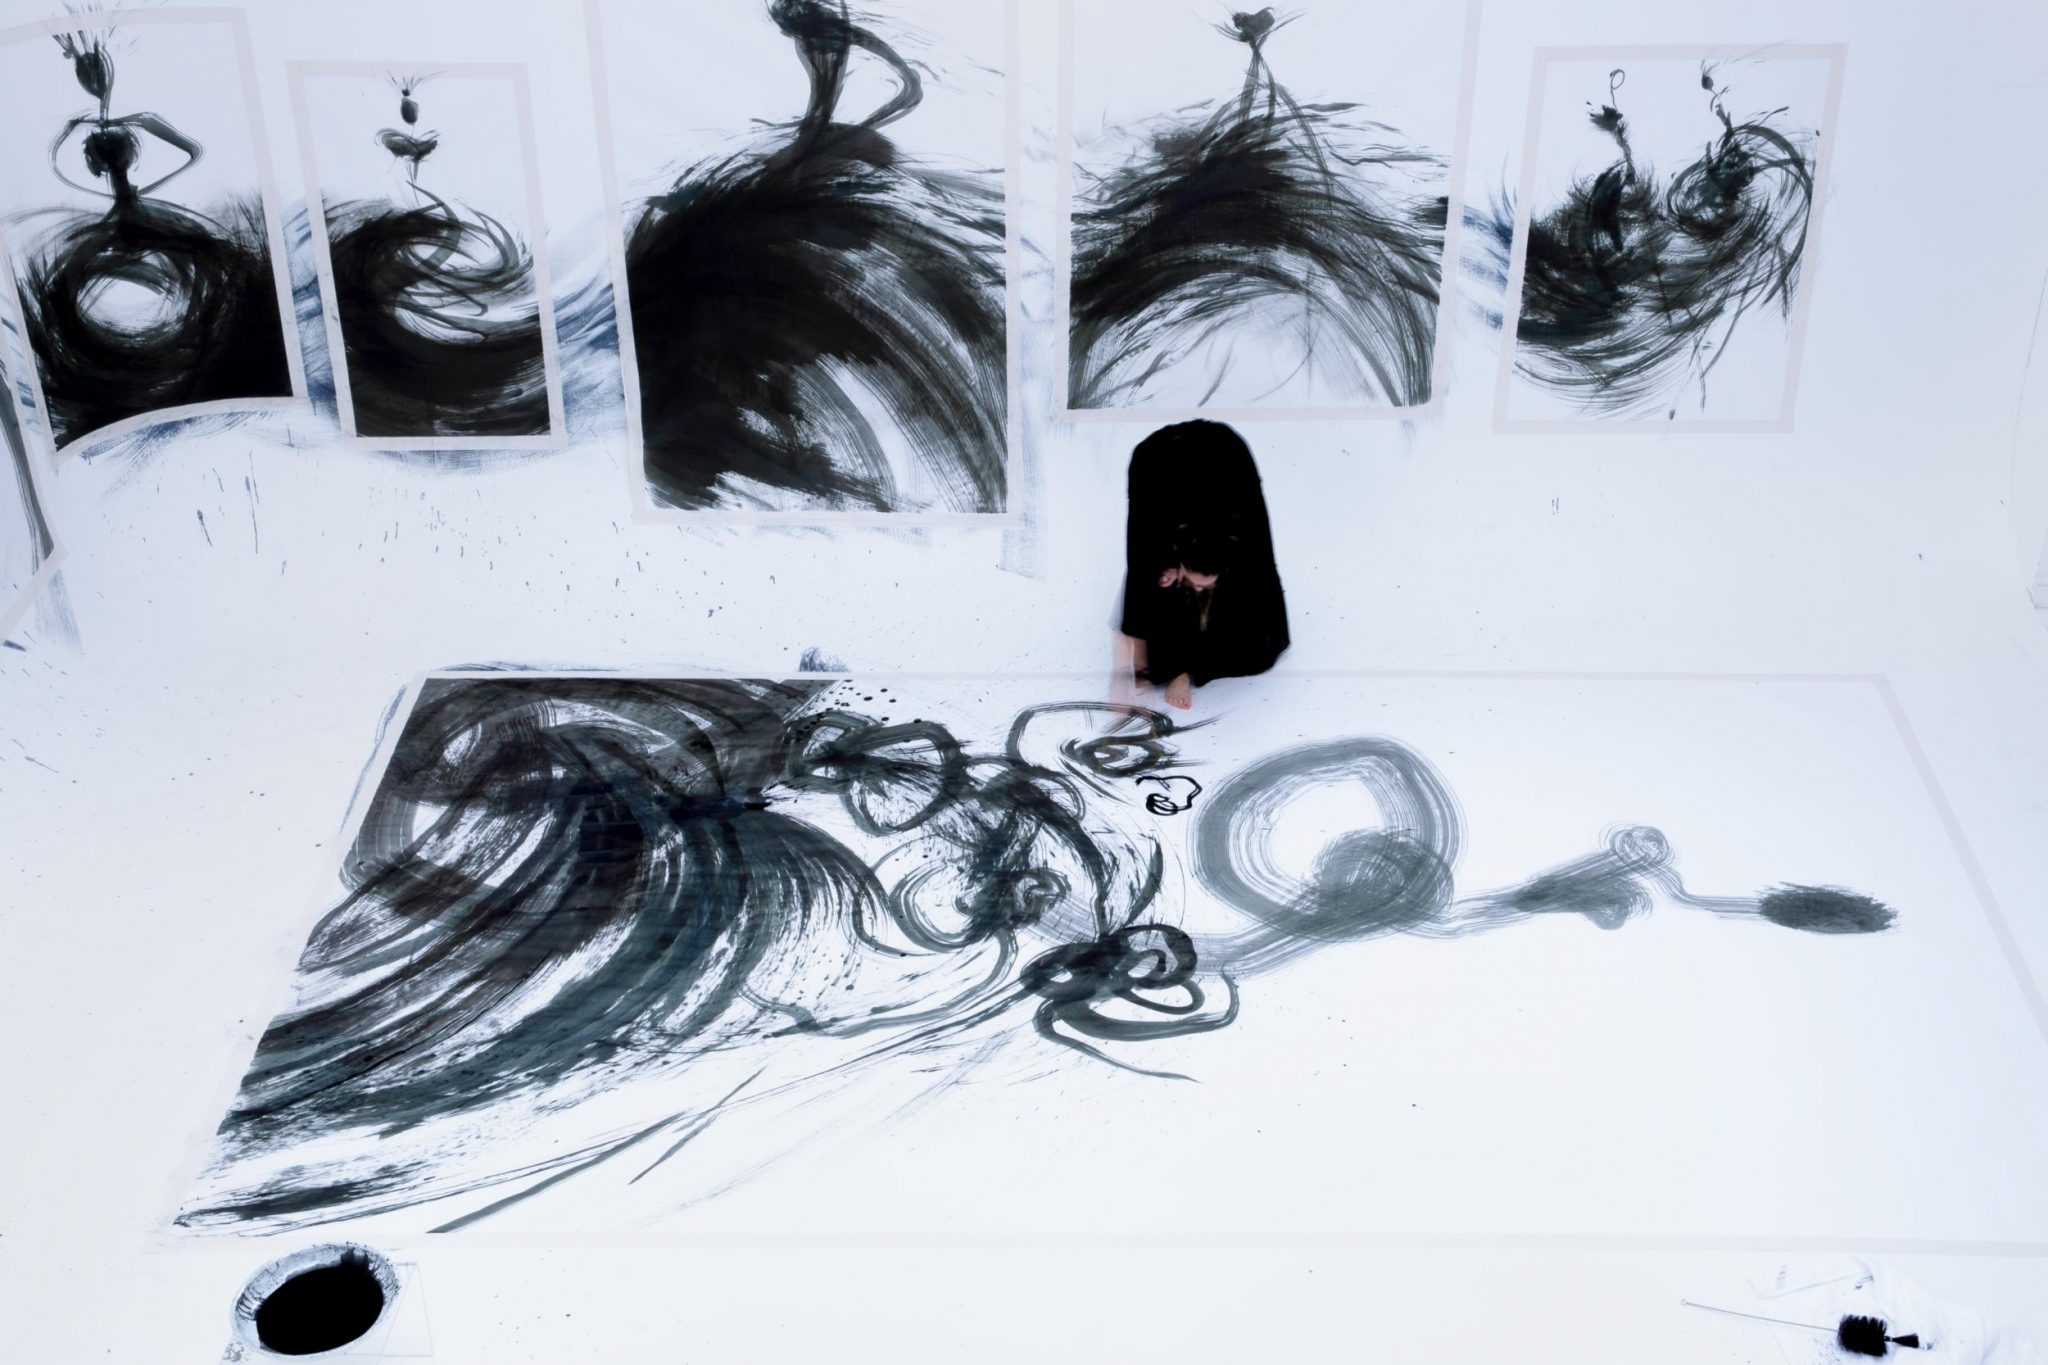  | SHOWStudio | Nightlight Series: On 26 April 2019, artist Tobie Giddio took up residency in the SHOWstudio space to create a large-scale fashion illustration live. The broadcast showcases Giddio’s creative process from start to finish, documenting her as she paints the walls and floor of the studio cove with ink. For this work, Giddio utilises a unique set of tools, comprising large Japanese brushes, mops and feather dusters.  | 14